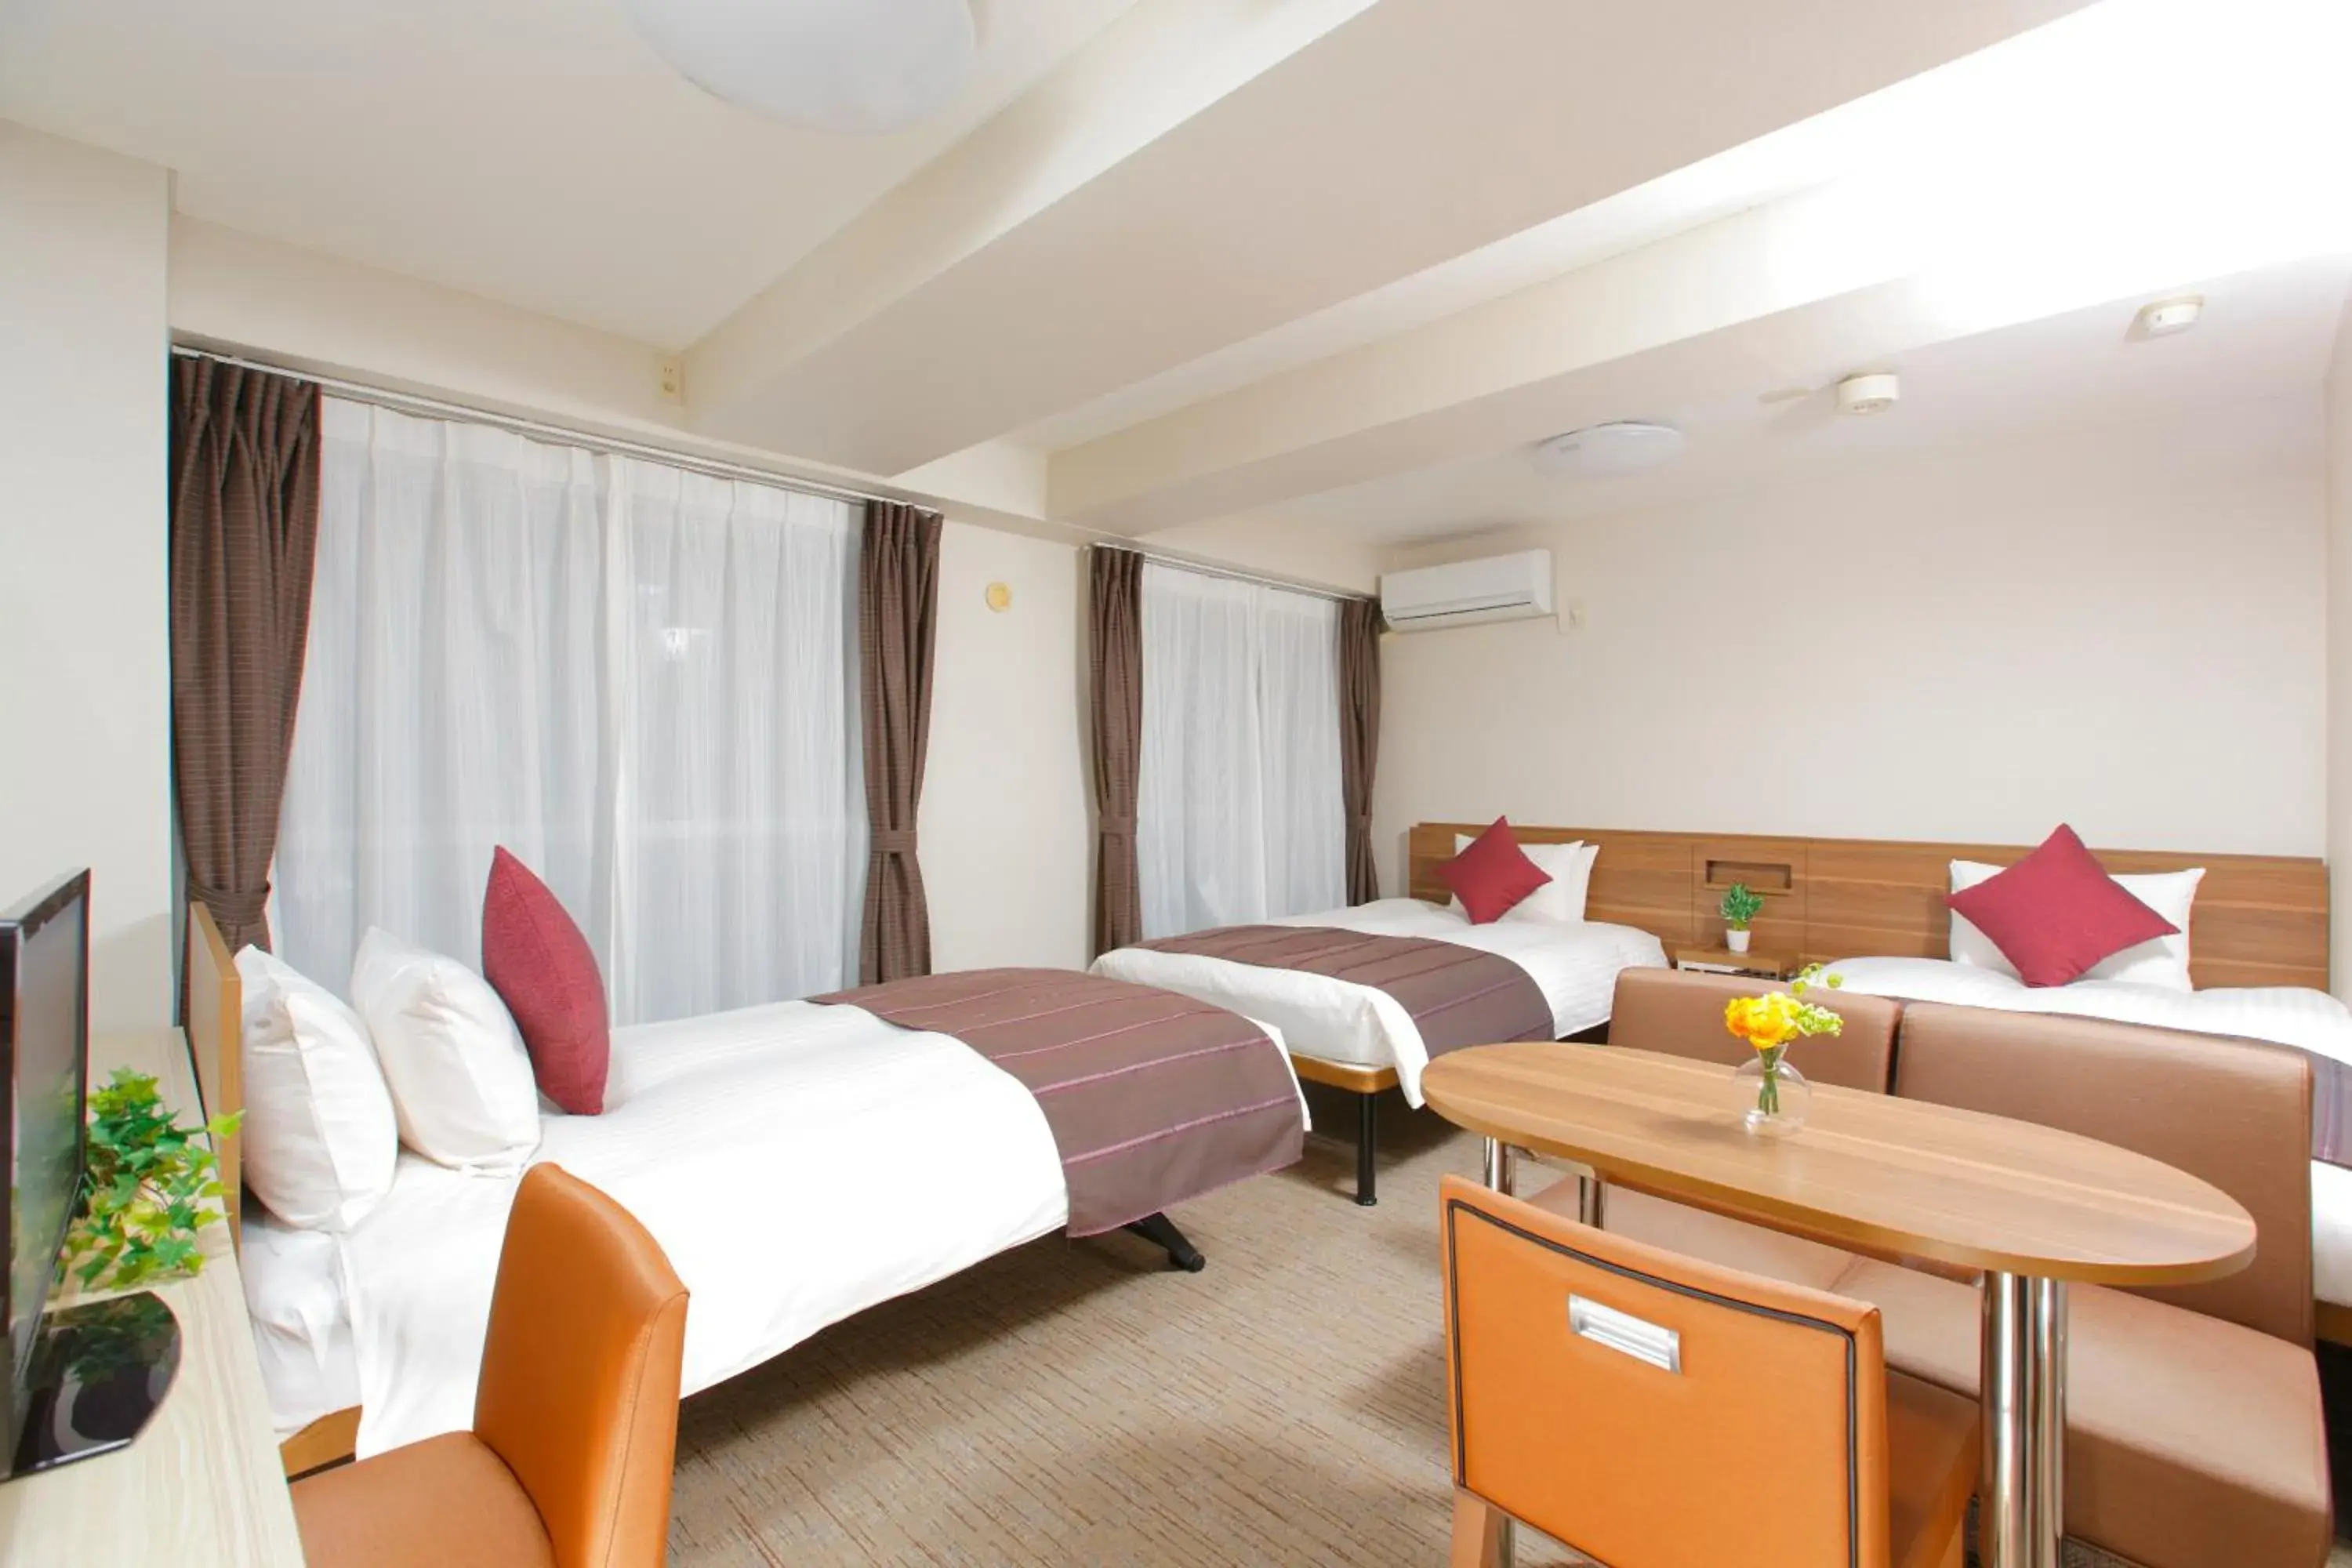 Deluxe Triple Room - House Keeping is Optional with Additional Cost - Non-Smoking in Hotel Mystays Ueno-Iriyaguchi